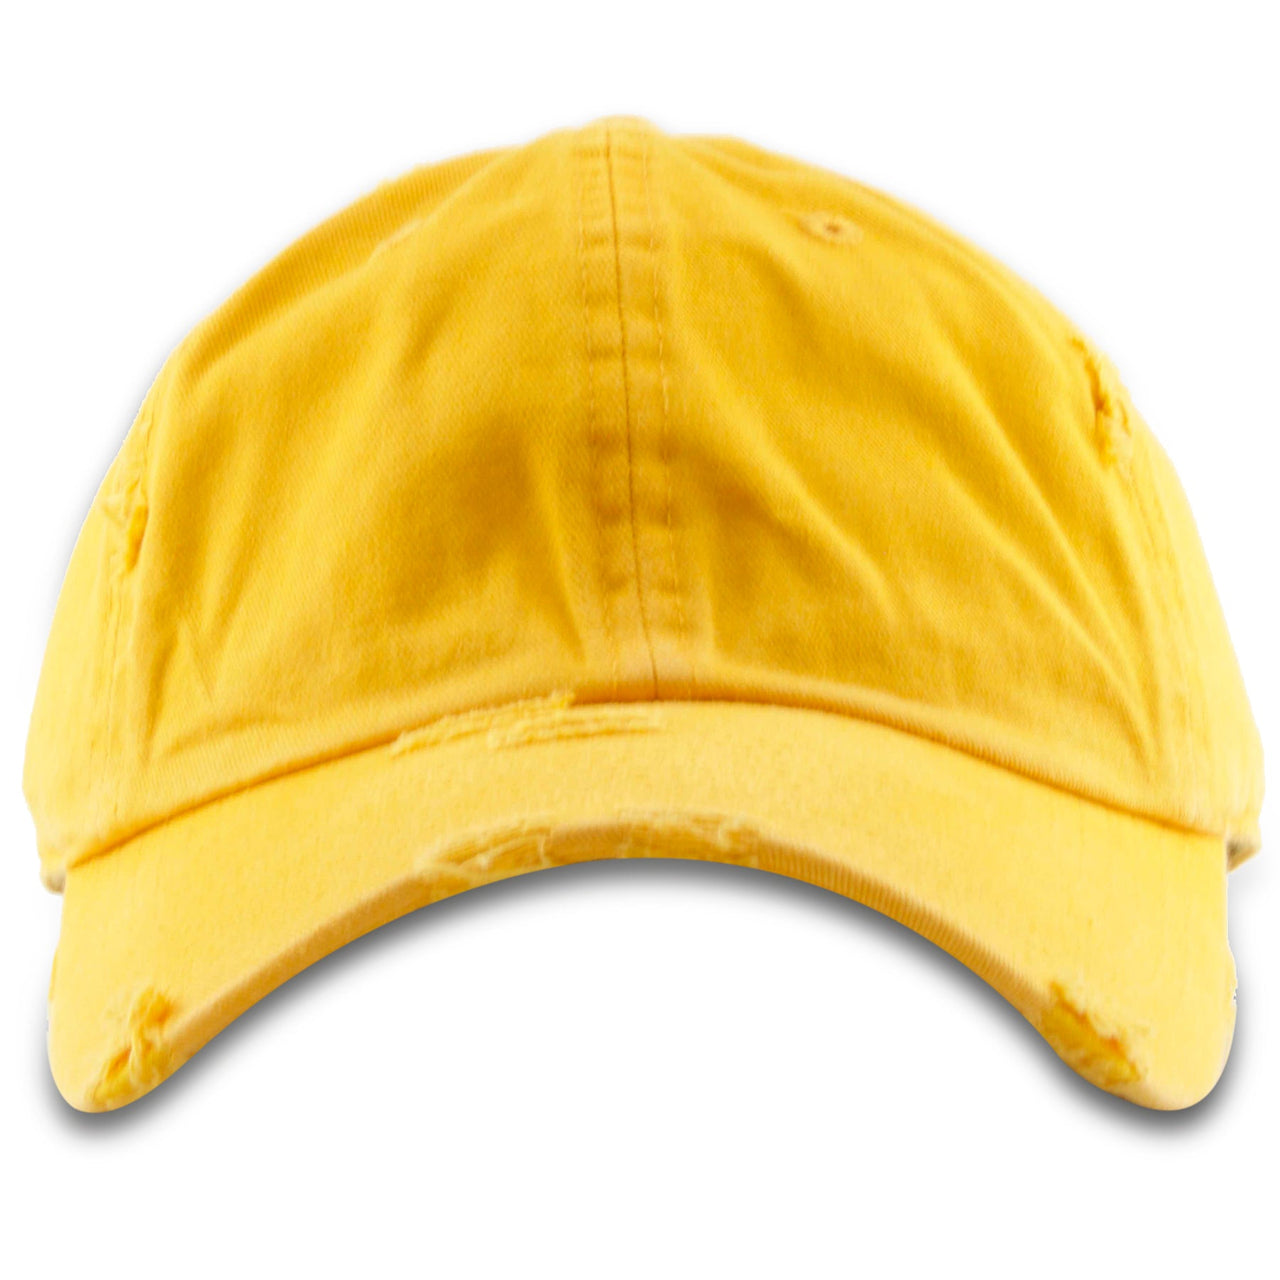 The yellow blank distressed dad hat is solid yellow with a soft unstructured crown and a bent brim